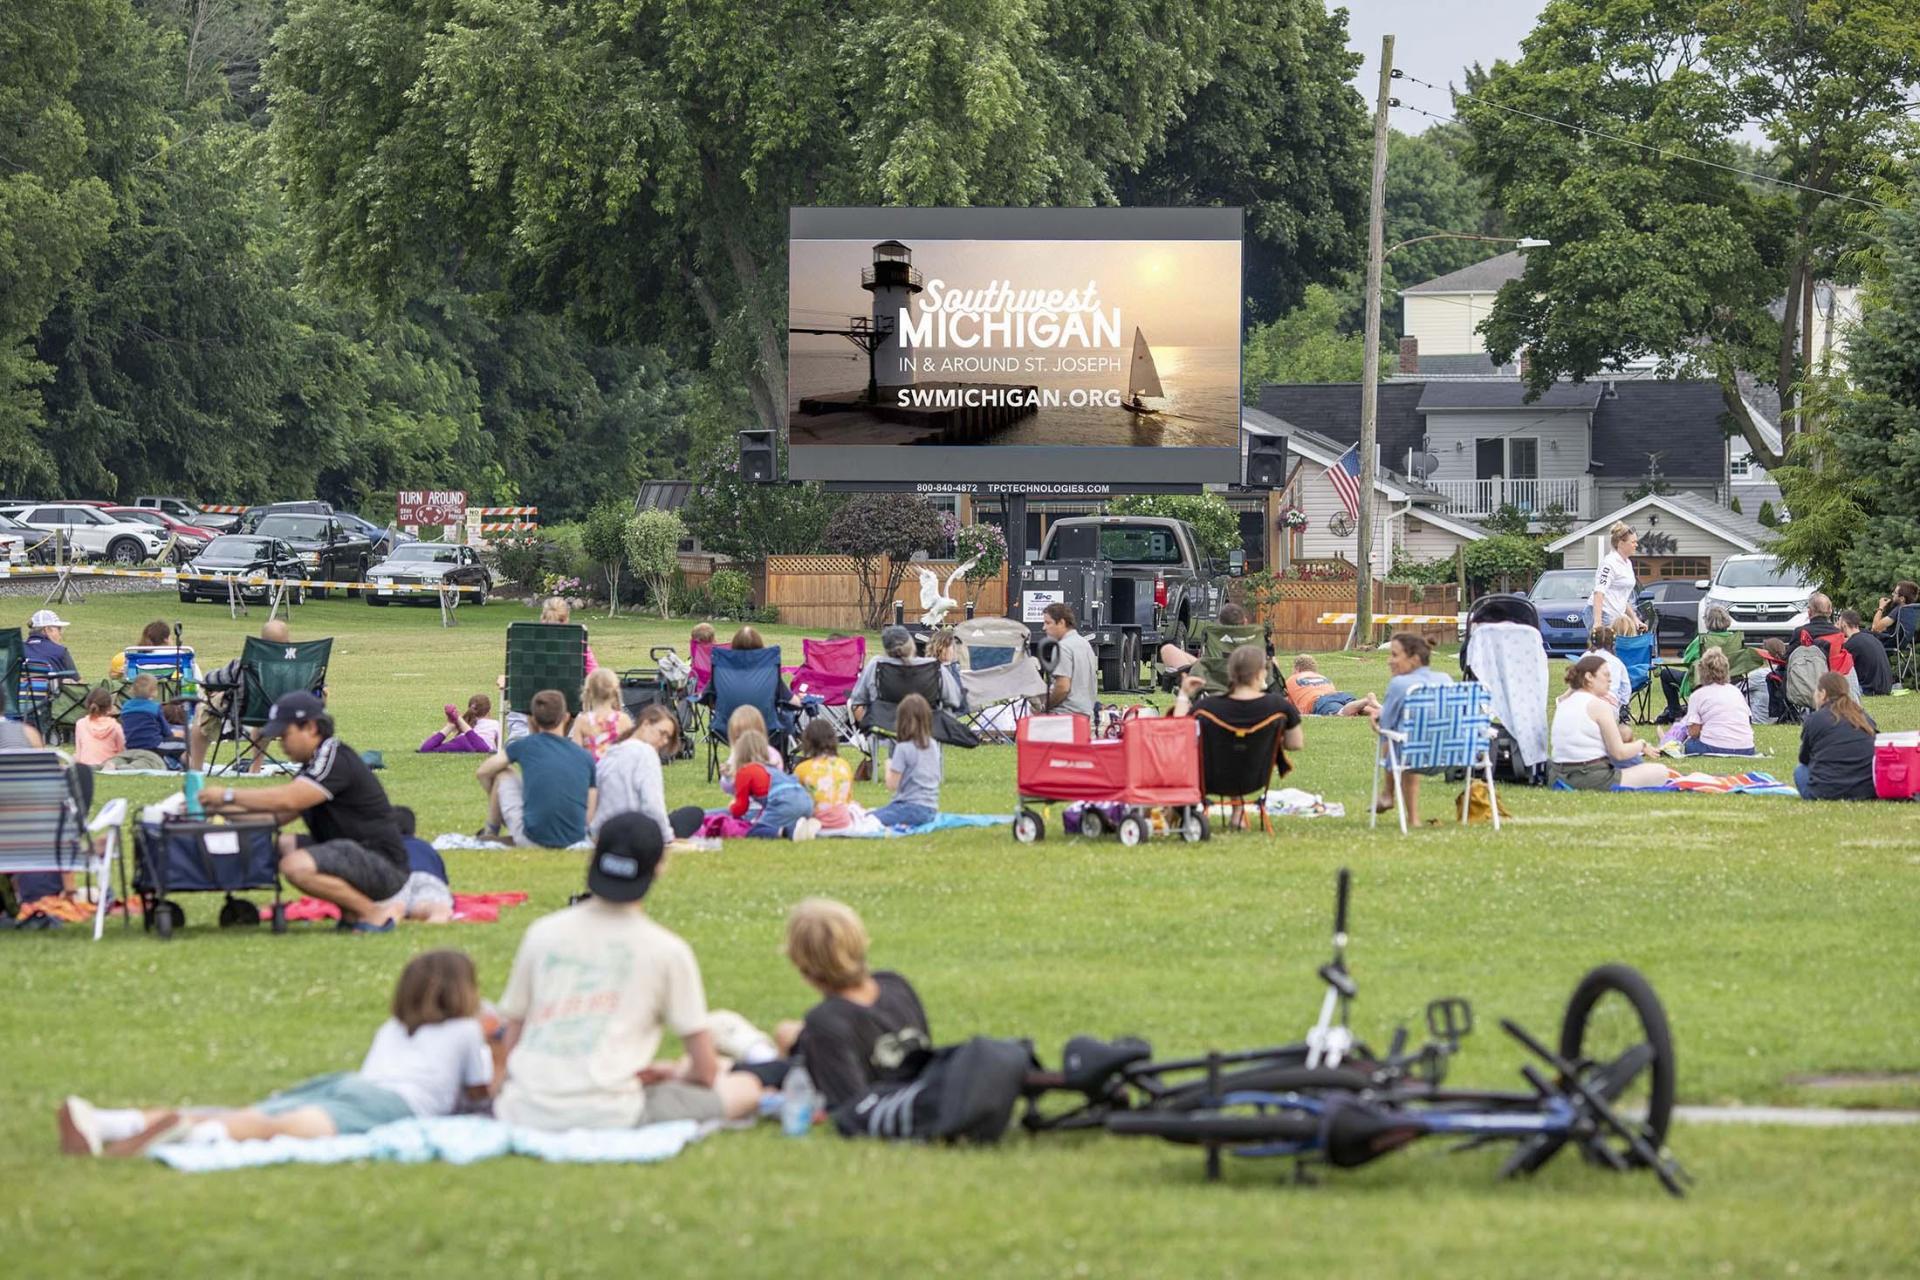 People watching a movie in a park in St. Joseph.